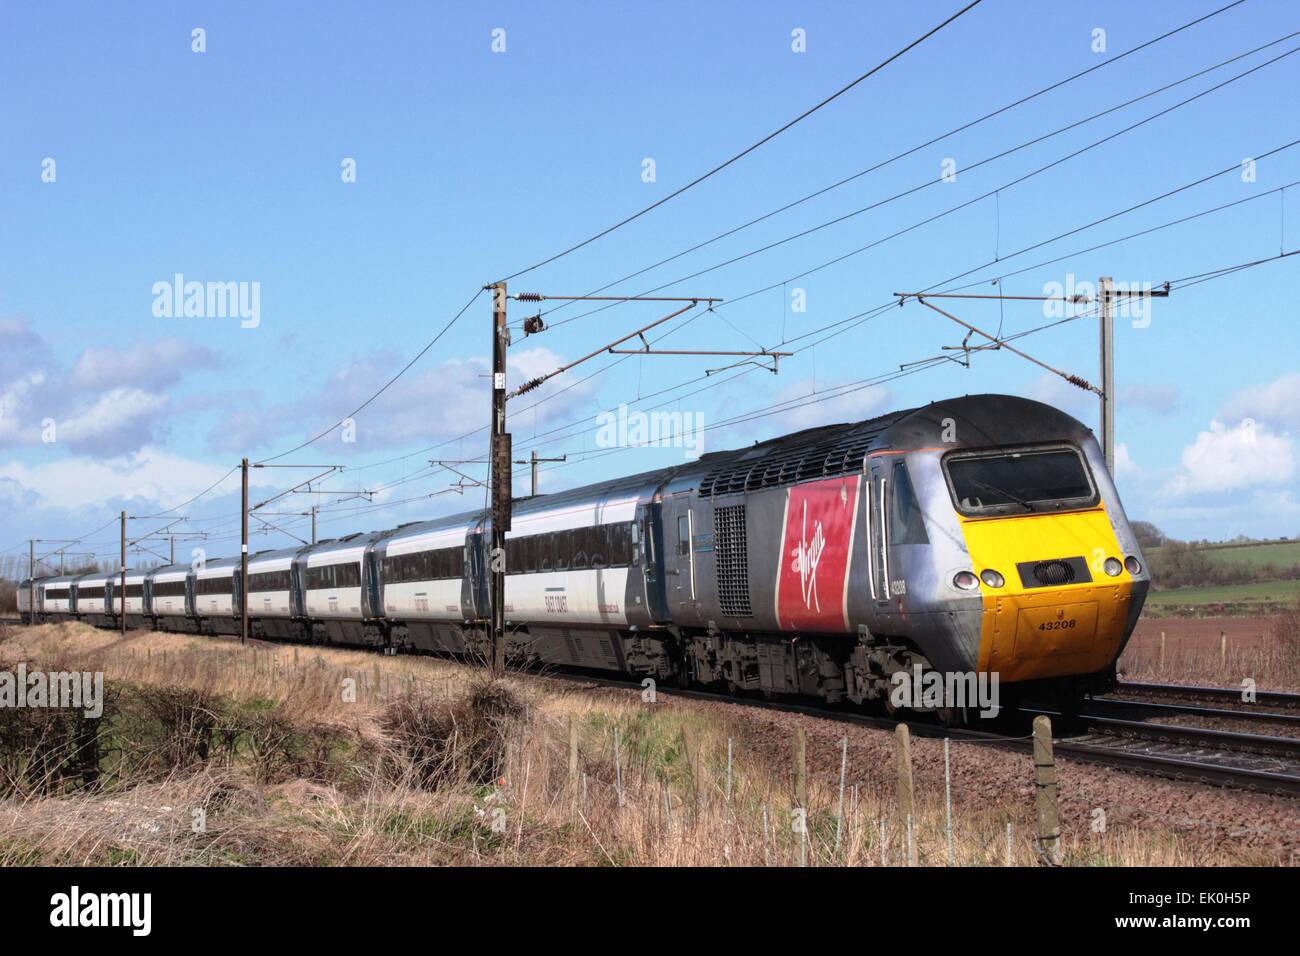 New Virgin branding on HST power car on East Coast Main Line soon after the change of franchise to Virgin Trains East Coast. Stock Photo